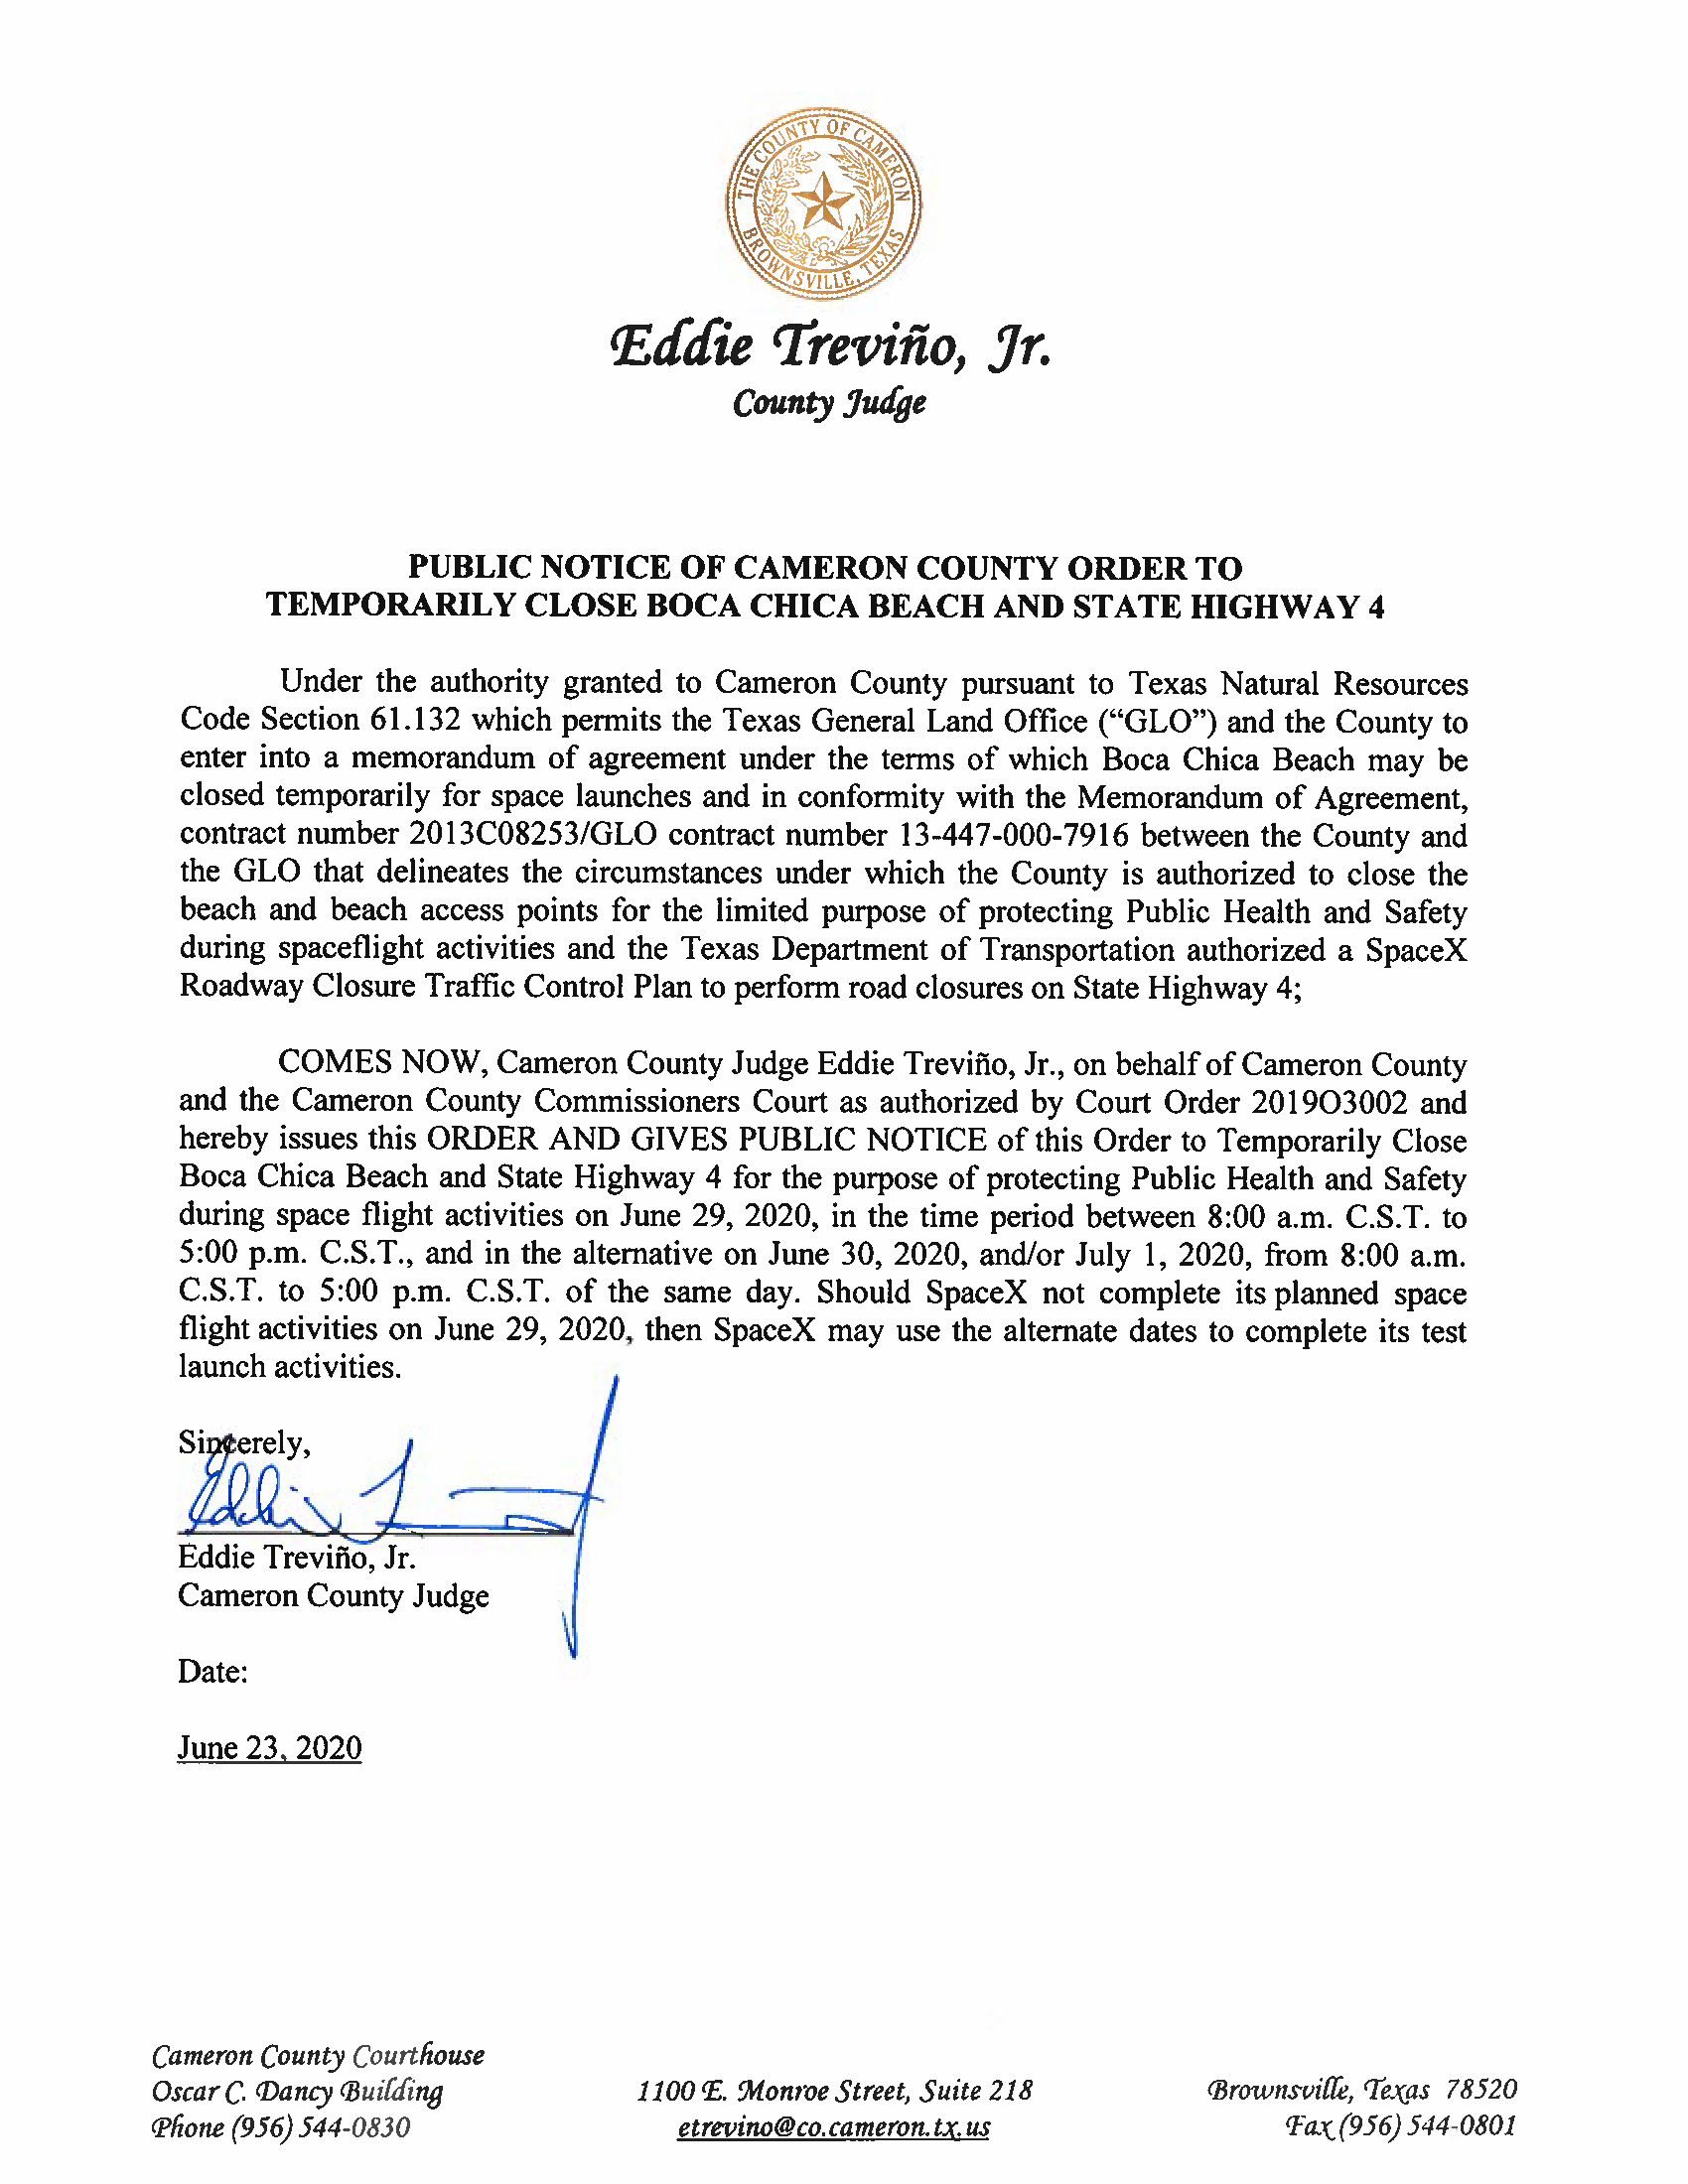 PUBLIC NOTICE OF CAMERON COUNTY ORDER TO TEMP. BEACH CLOSURE AND HWY.06.29.20 Page 1